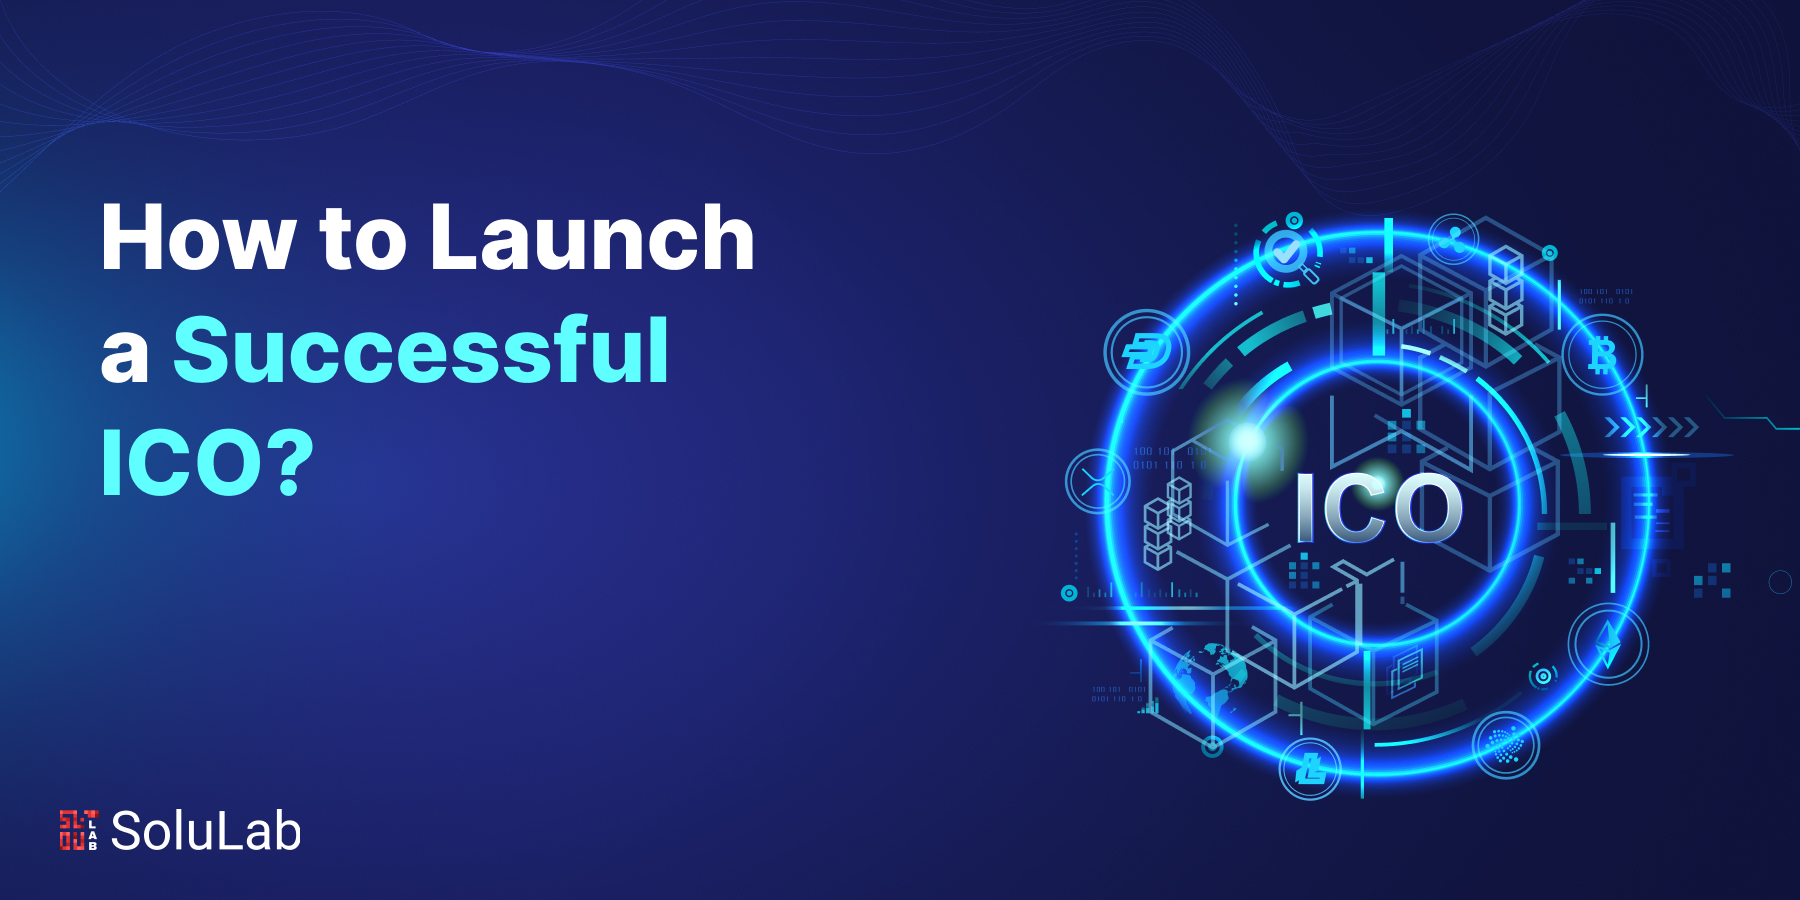 How to Launch a successful ICO?